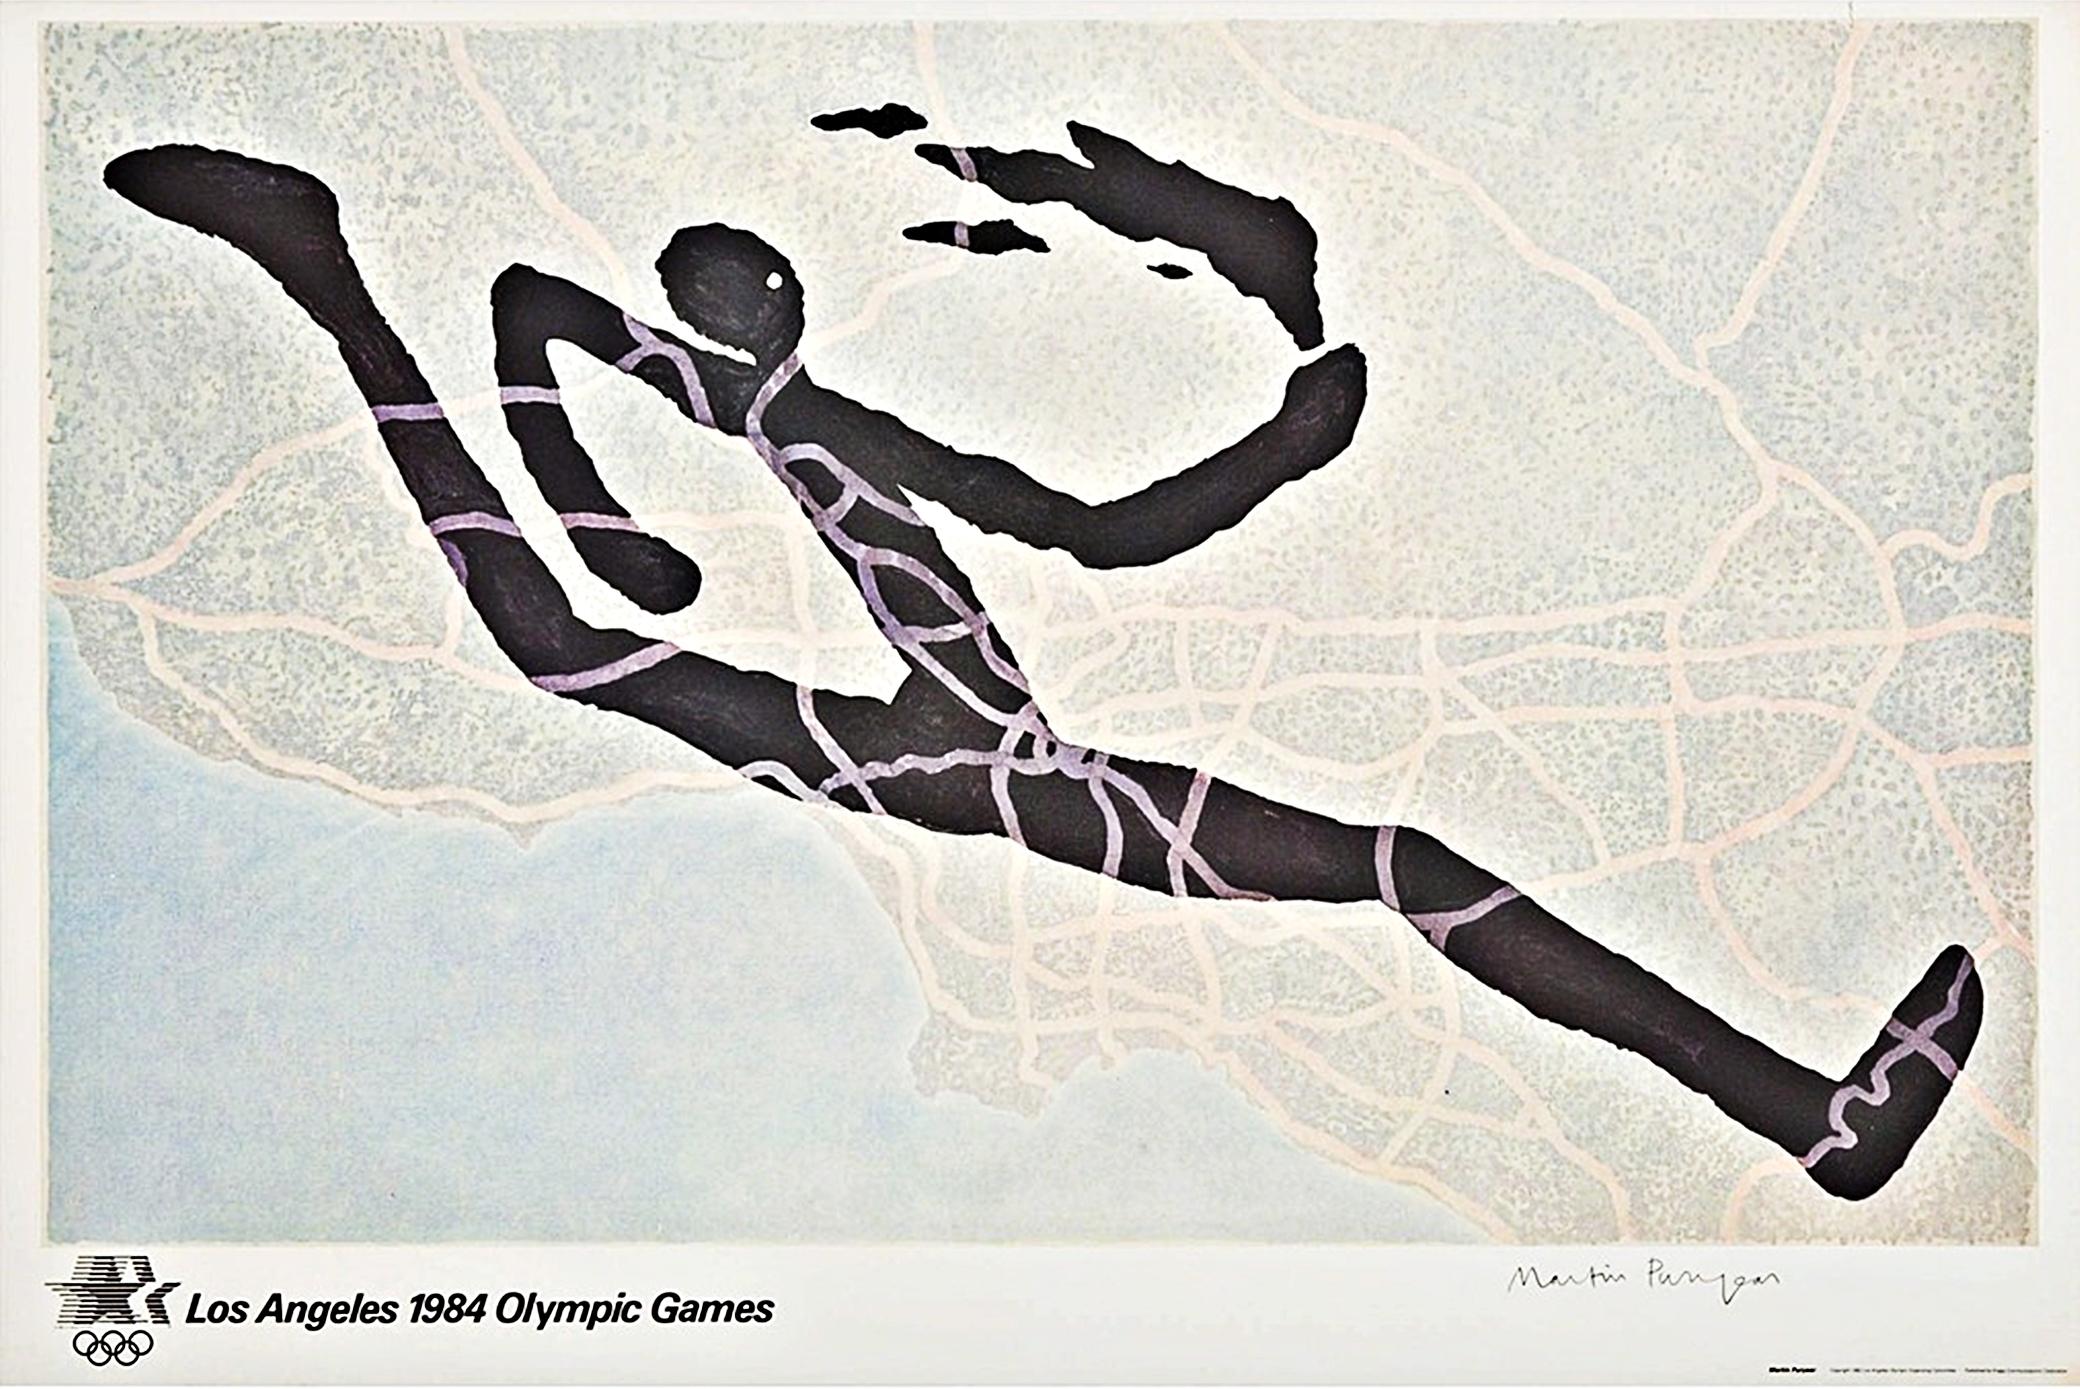 Martin Puryear Abstract Print - Los Angeles Olympic Games 1984 (hand signed with official Olympic Committee COA)